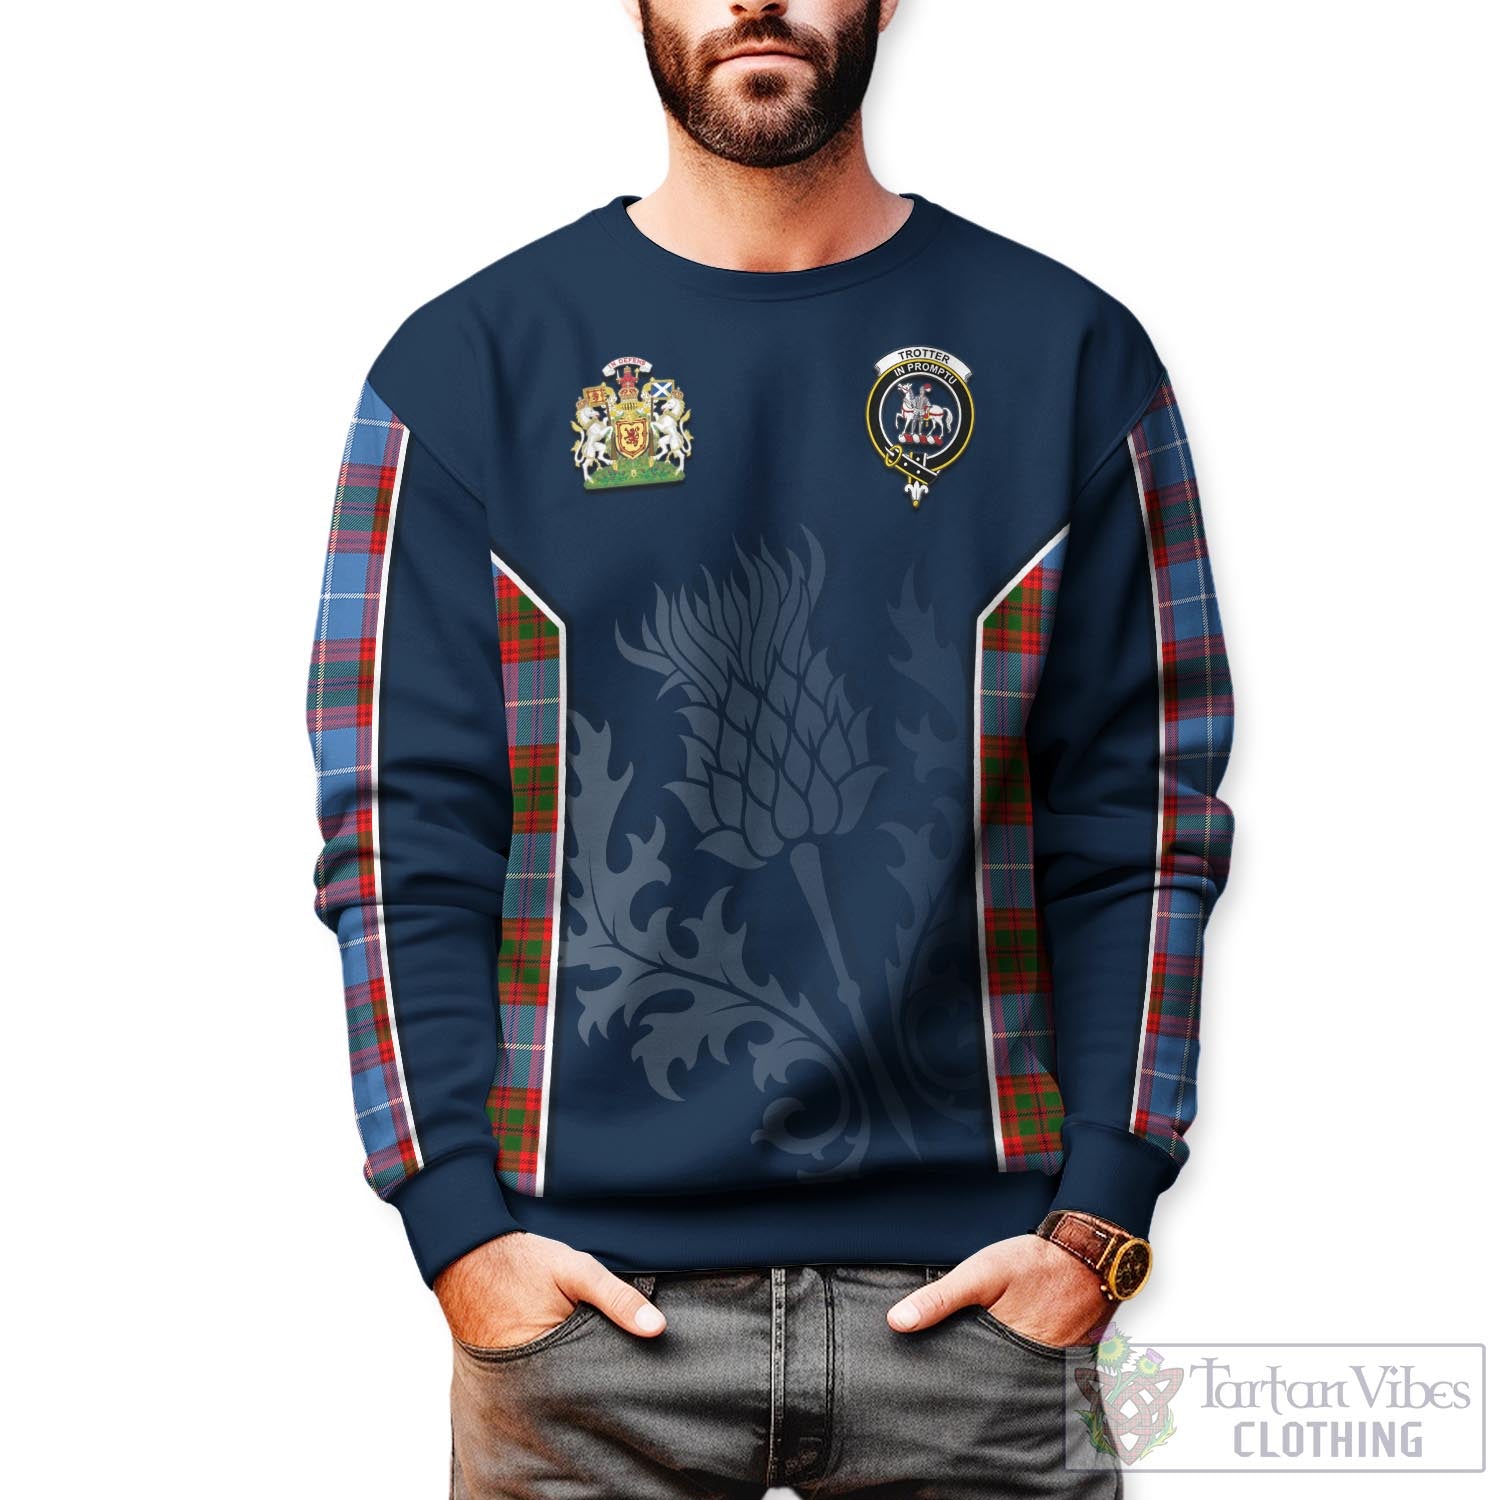 Tartan Vibes Clothing Trotter Tartan Sweatshirt with Family Crest and Scottish Thistle Vibes Sport Style